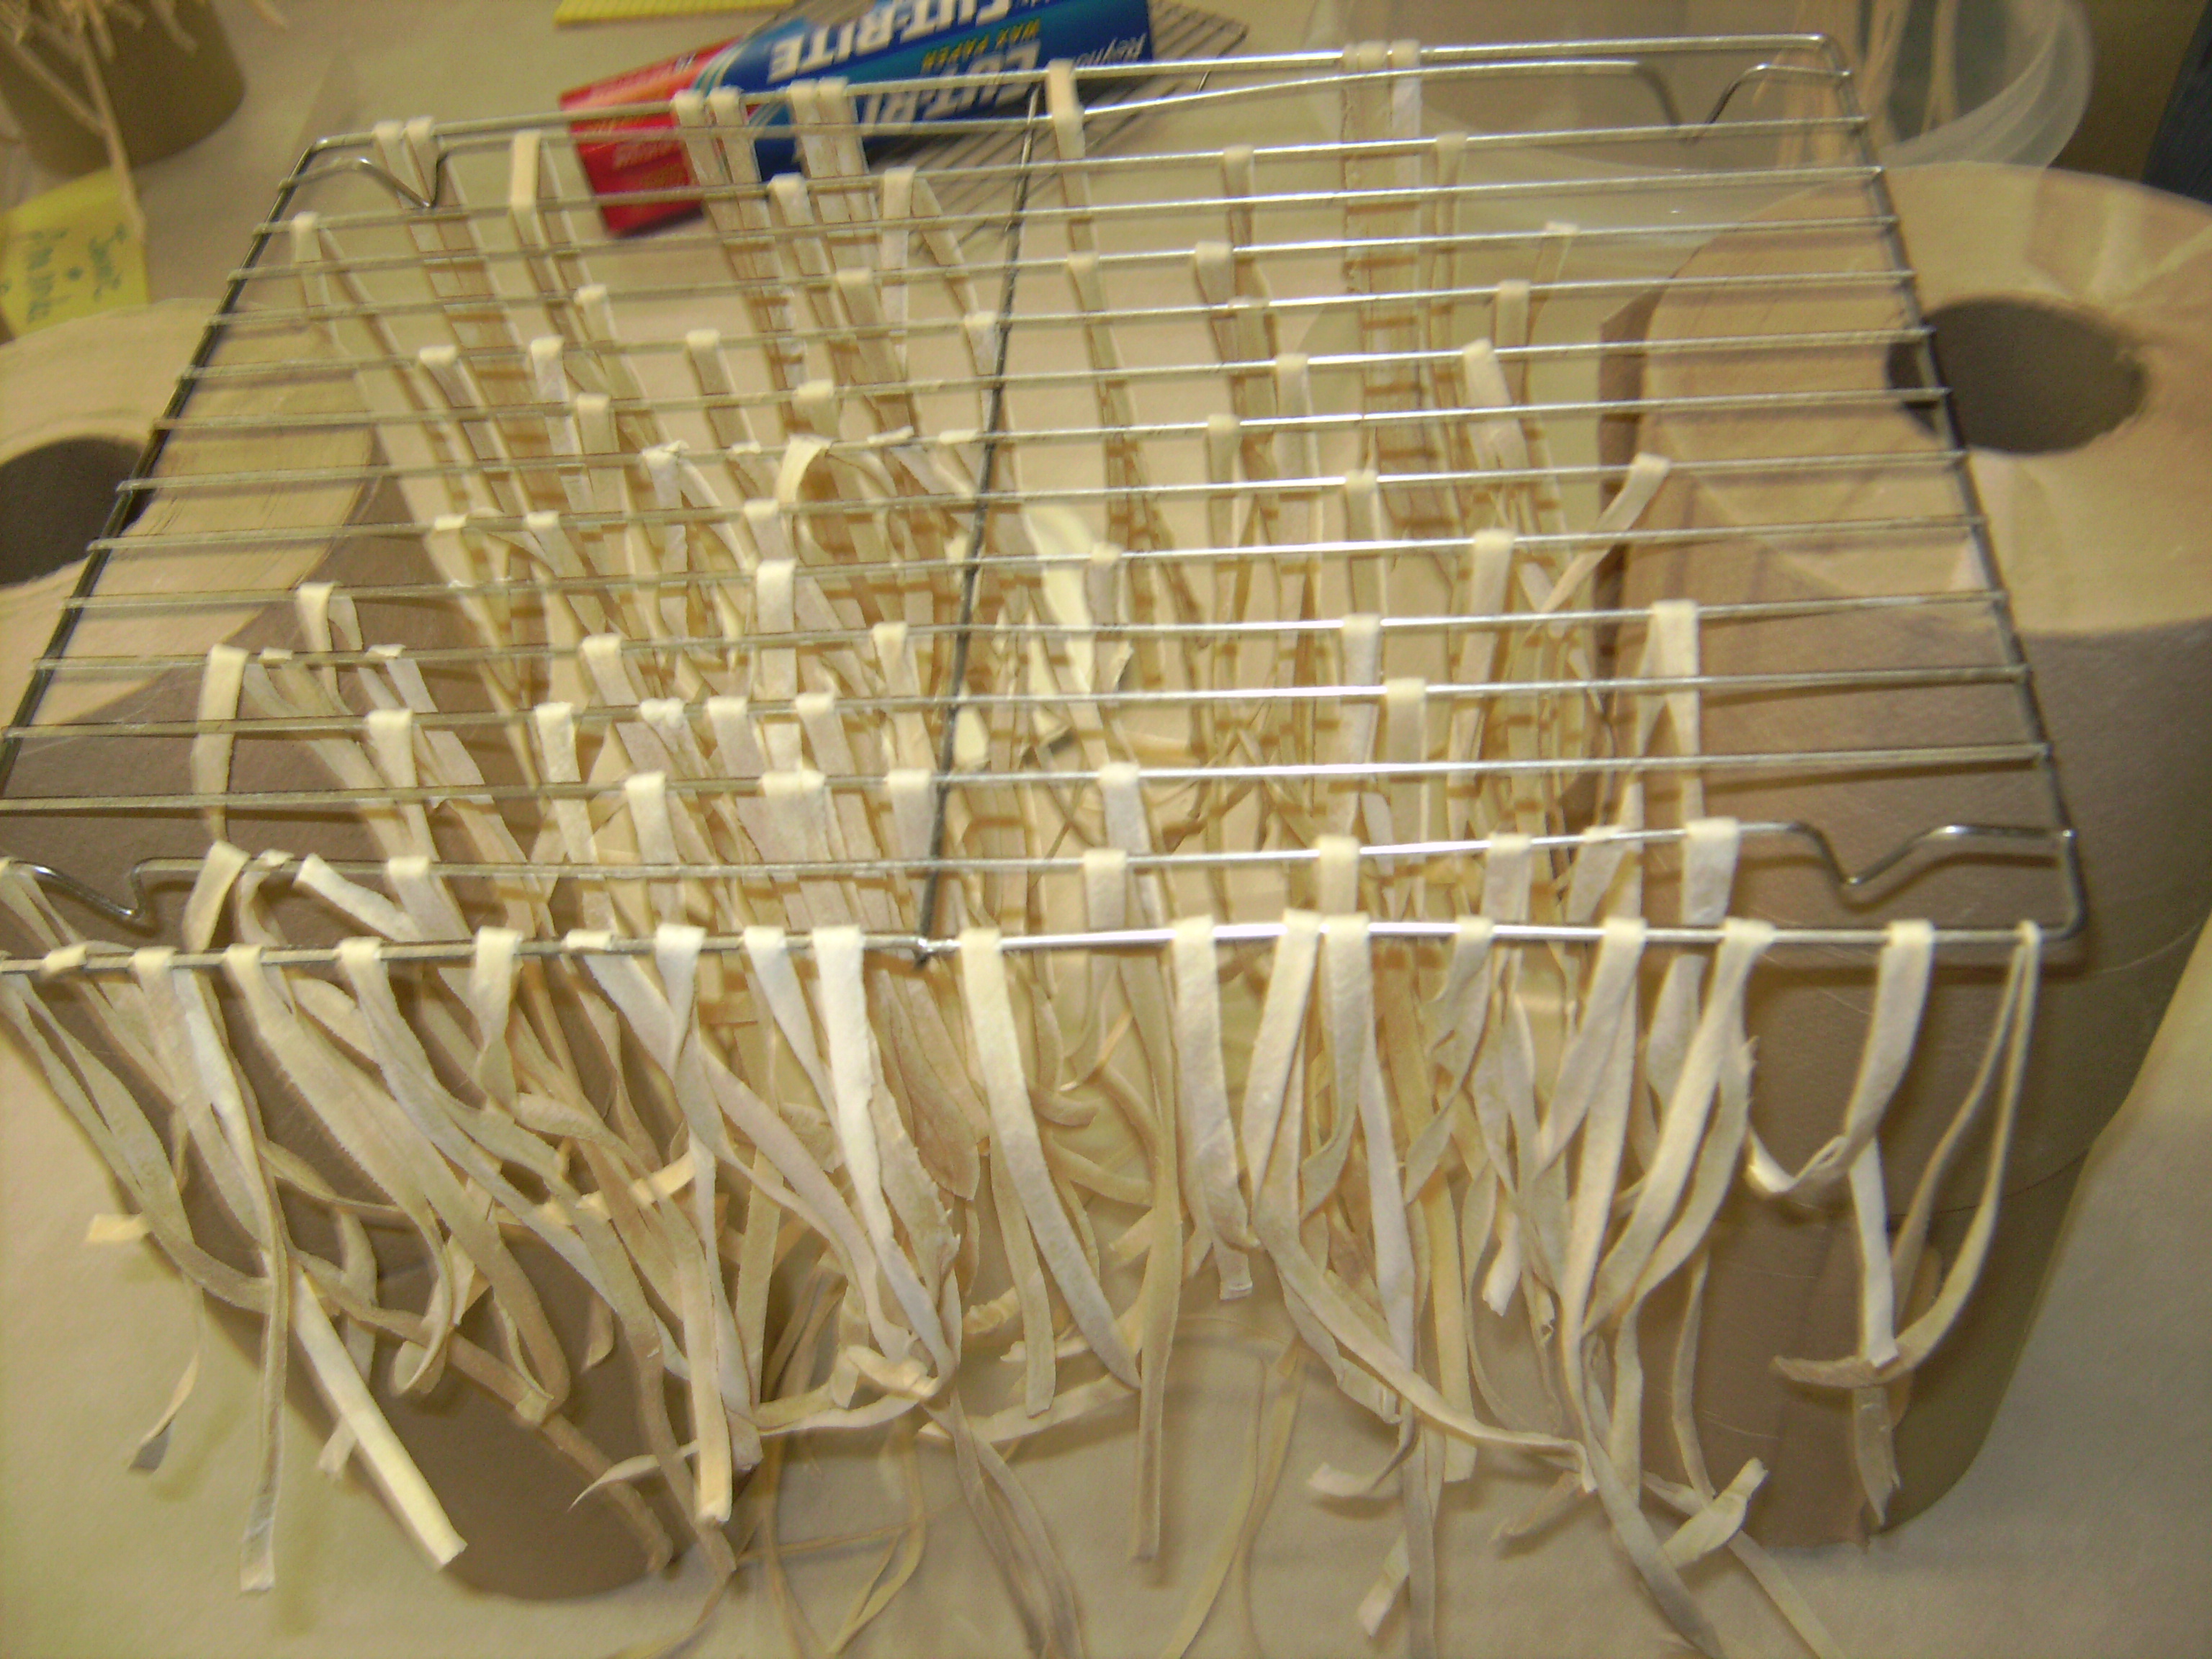 This is a make-shift Pasta Drying Rack Made from a Cooling Rack & Paper Towels